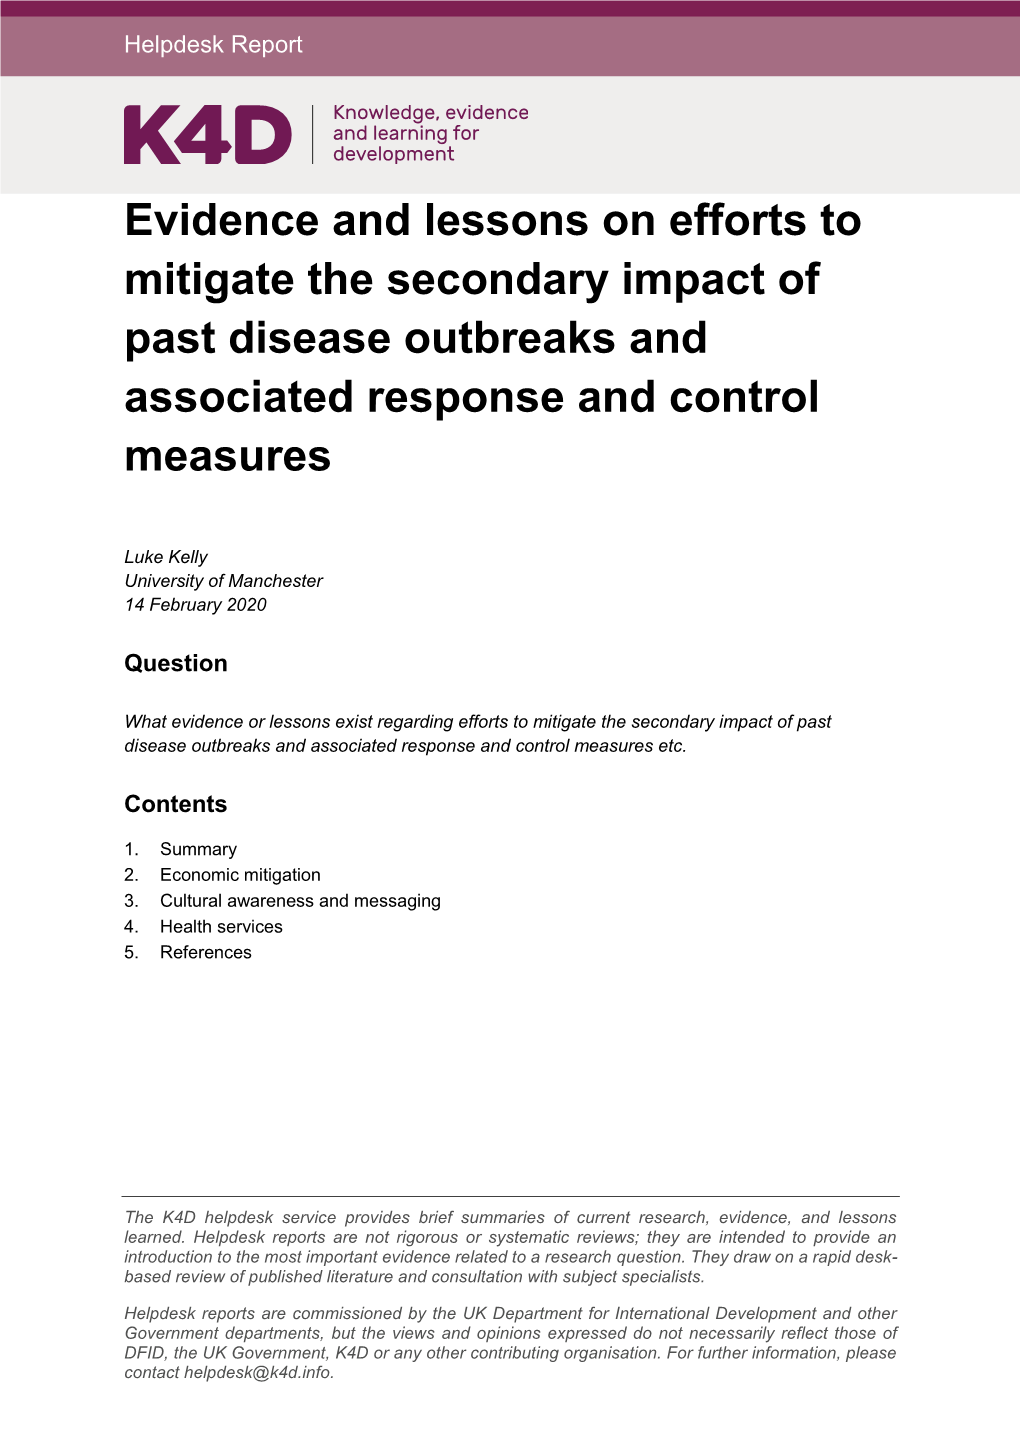 Evidence and Lessons on Efforts to Mitigate the Secondary Impact of Past Disease Outbreaks and Associated Response and Control Measures